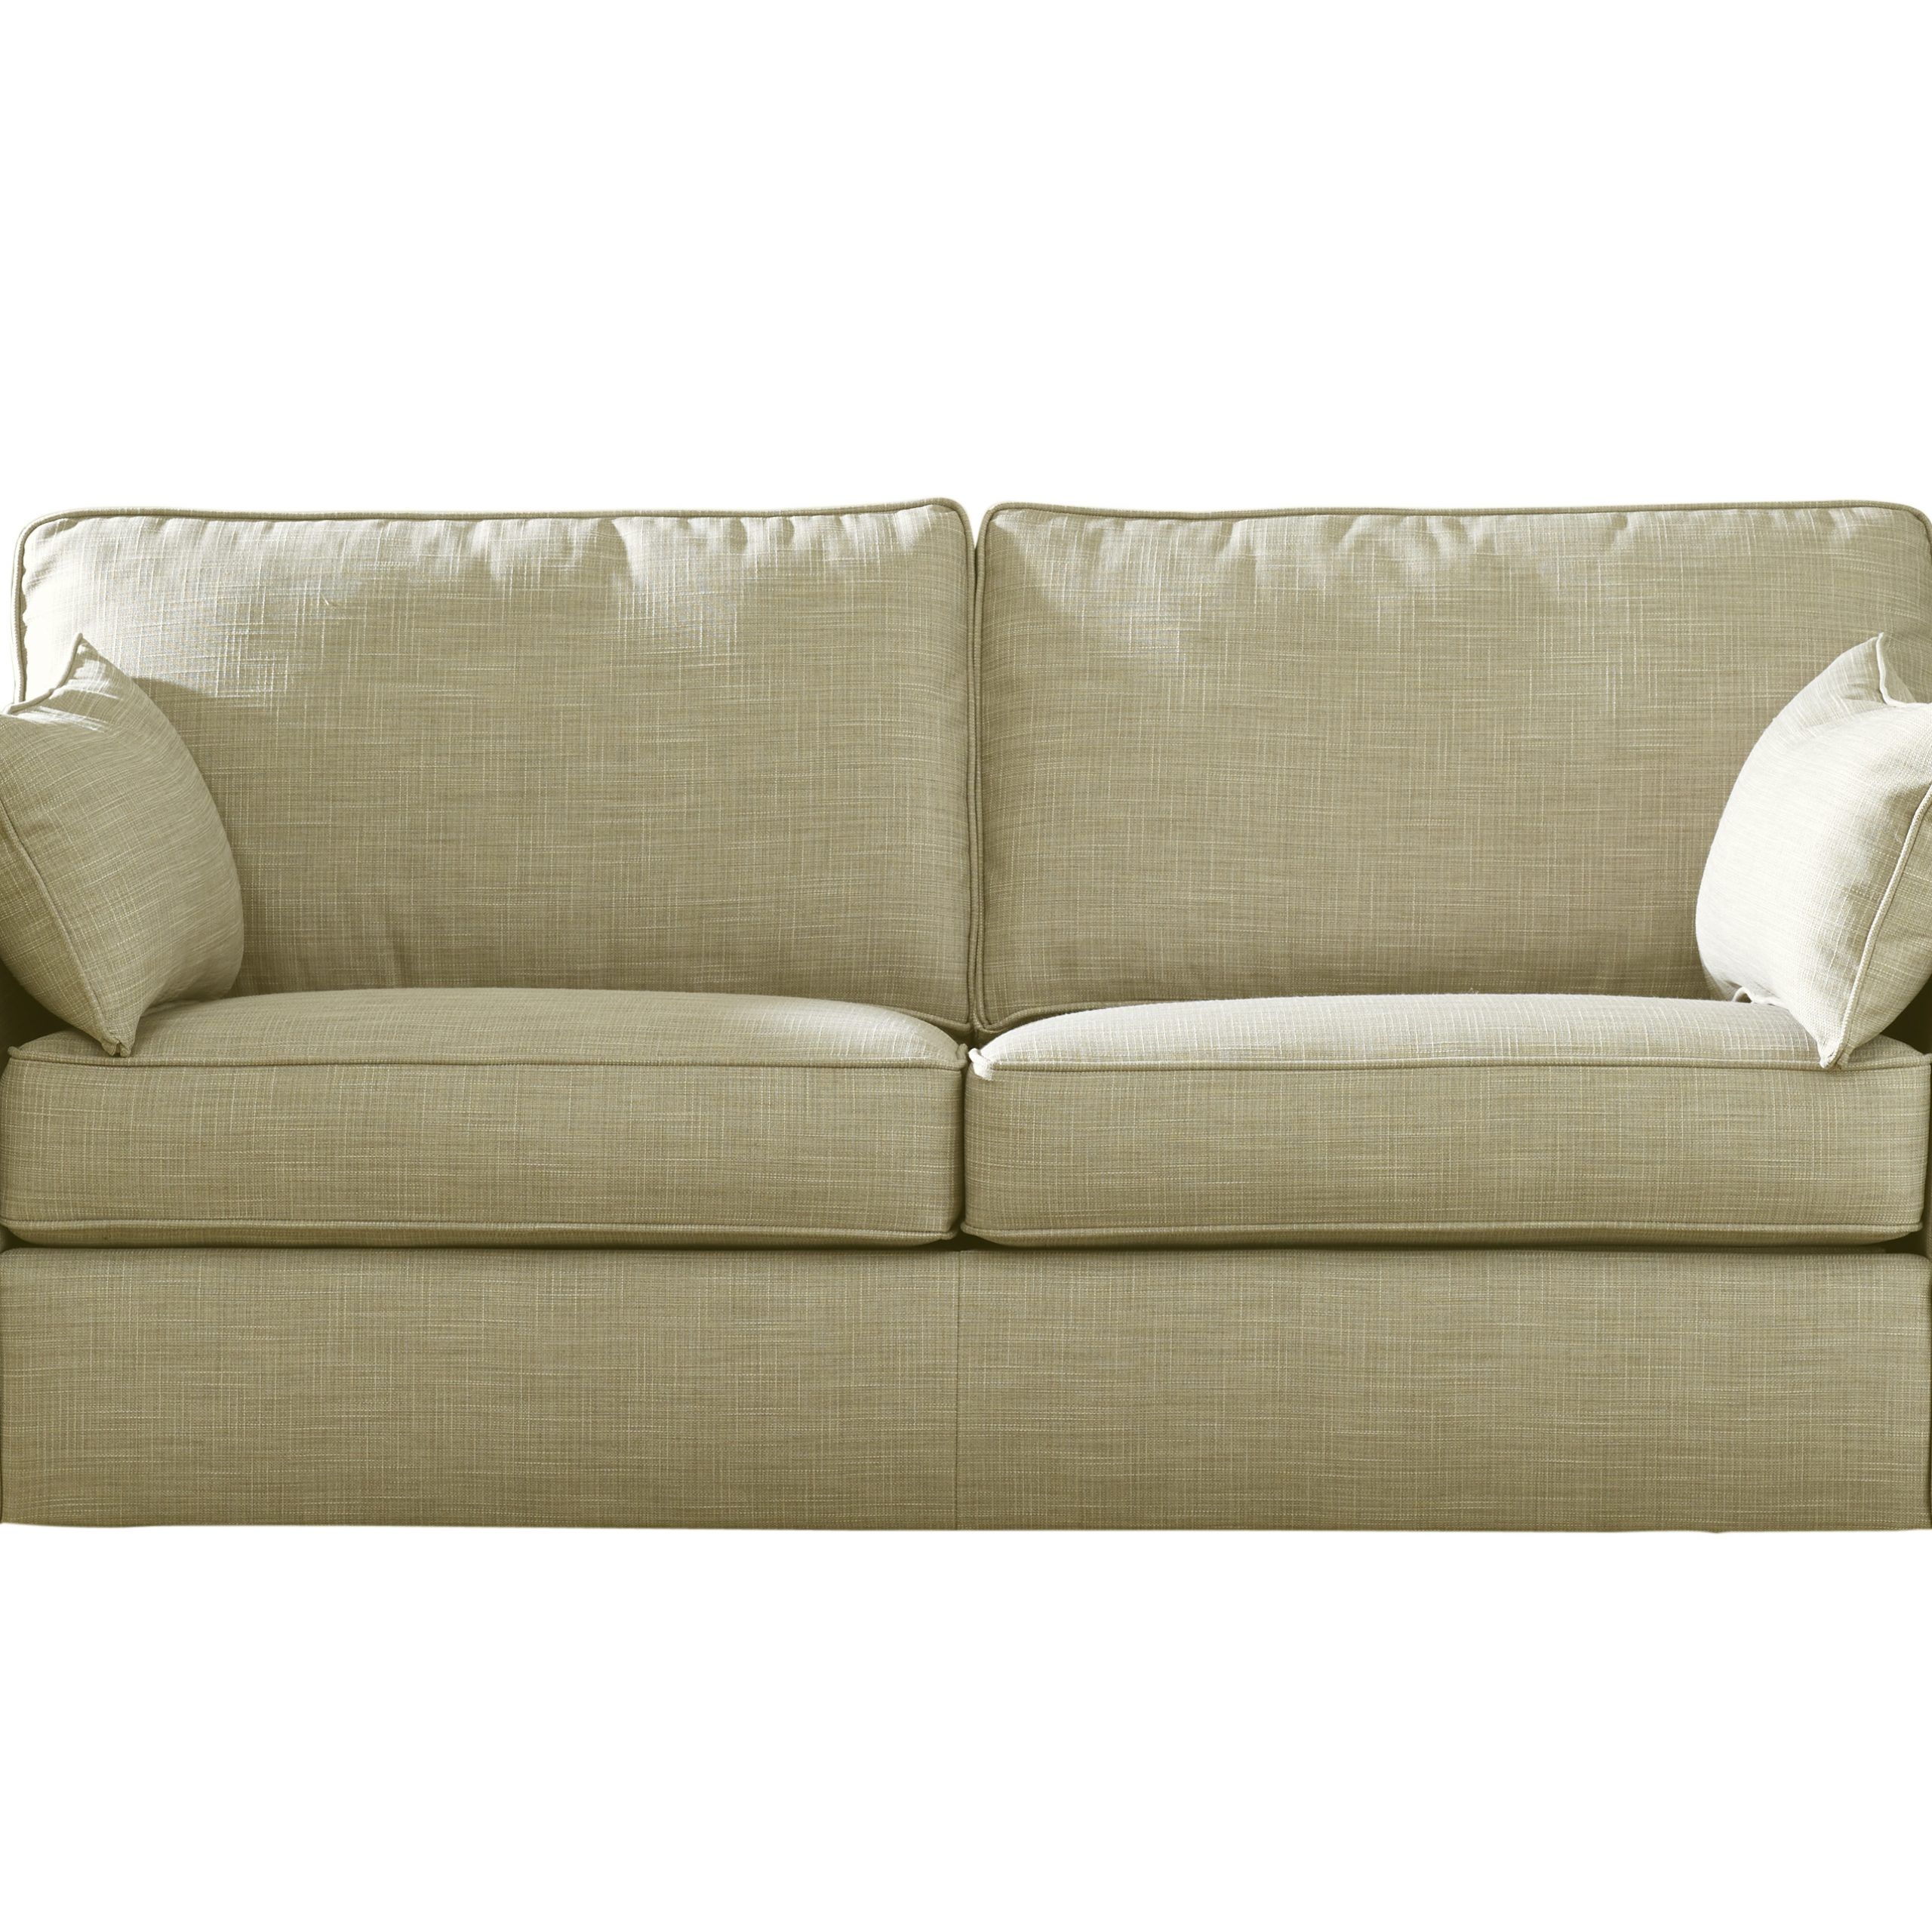 Montana Sofa Bed – Comfort And Slouch For Montana Sofas (View 7 of 15)